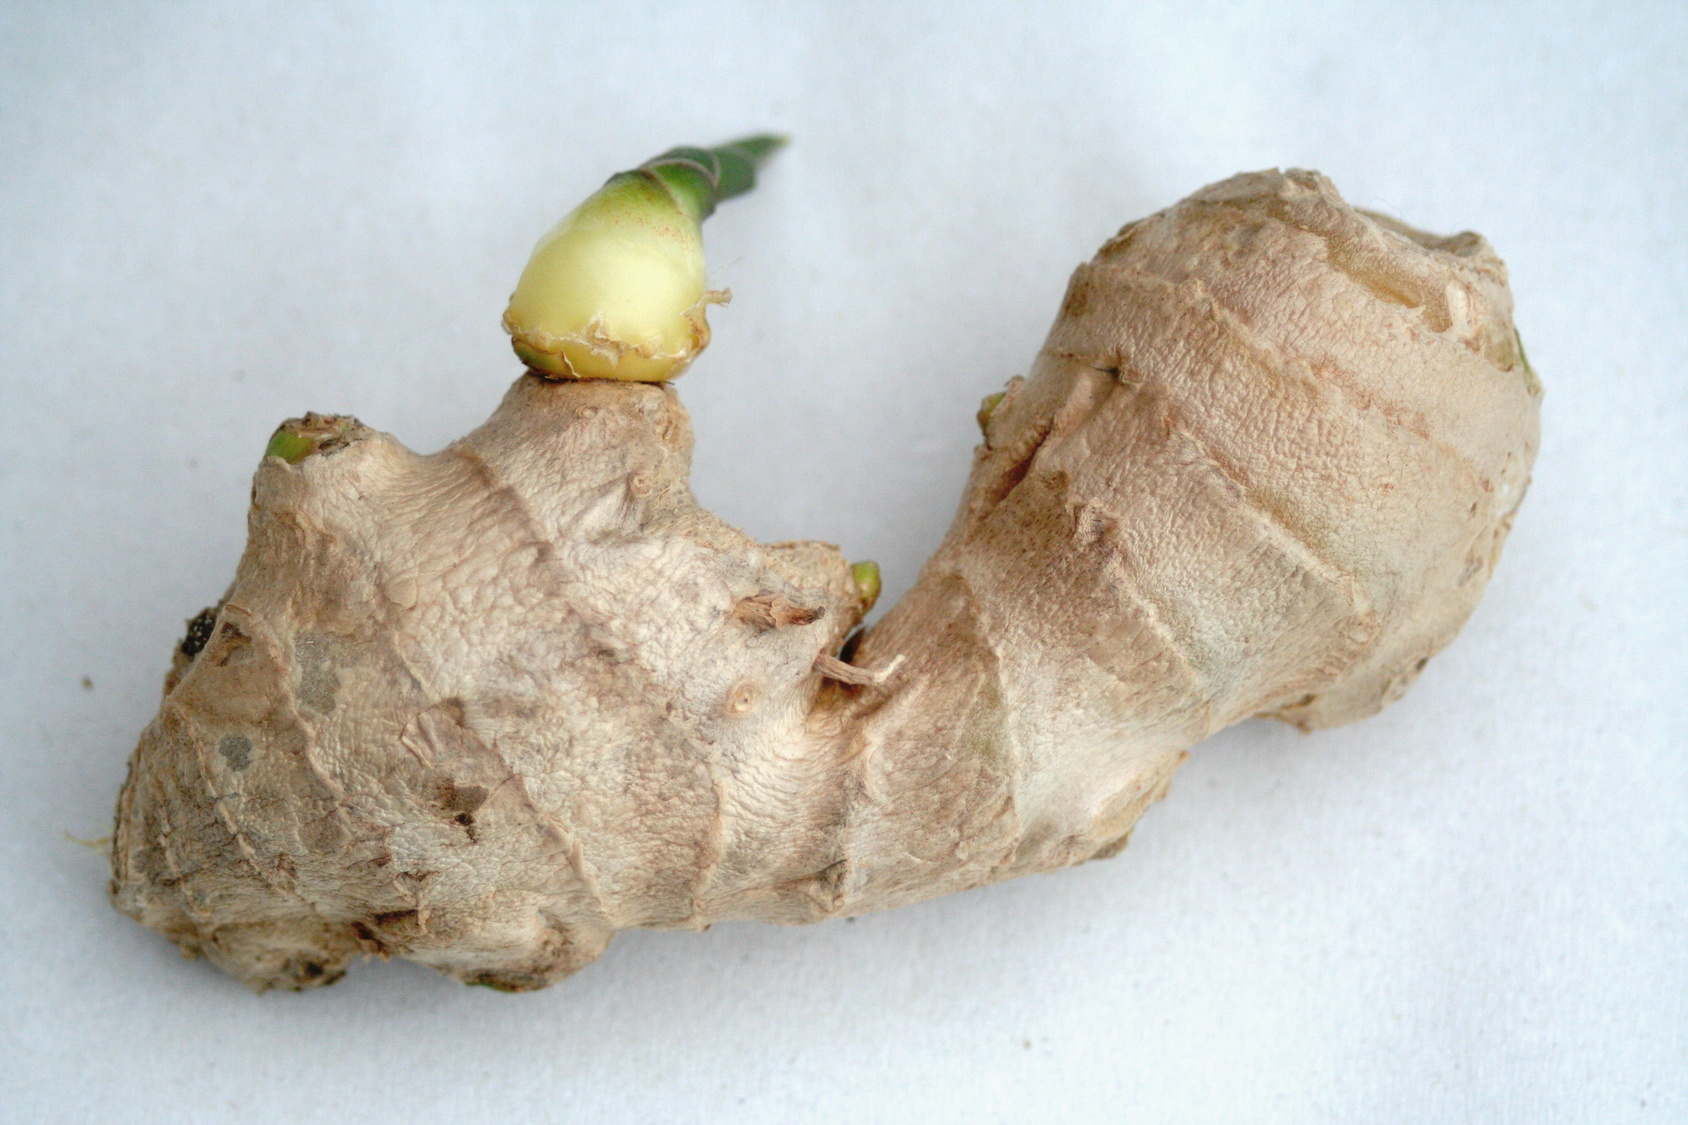 Ginger root sprouting